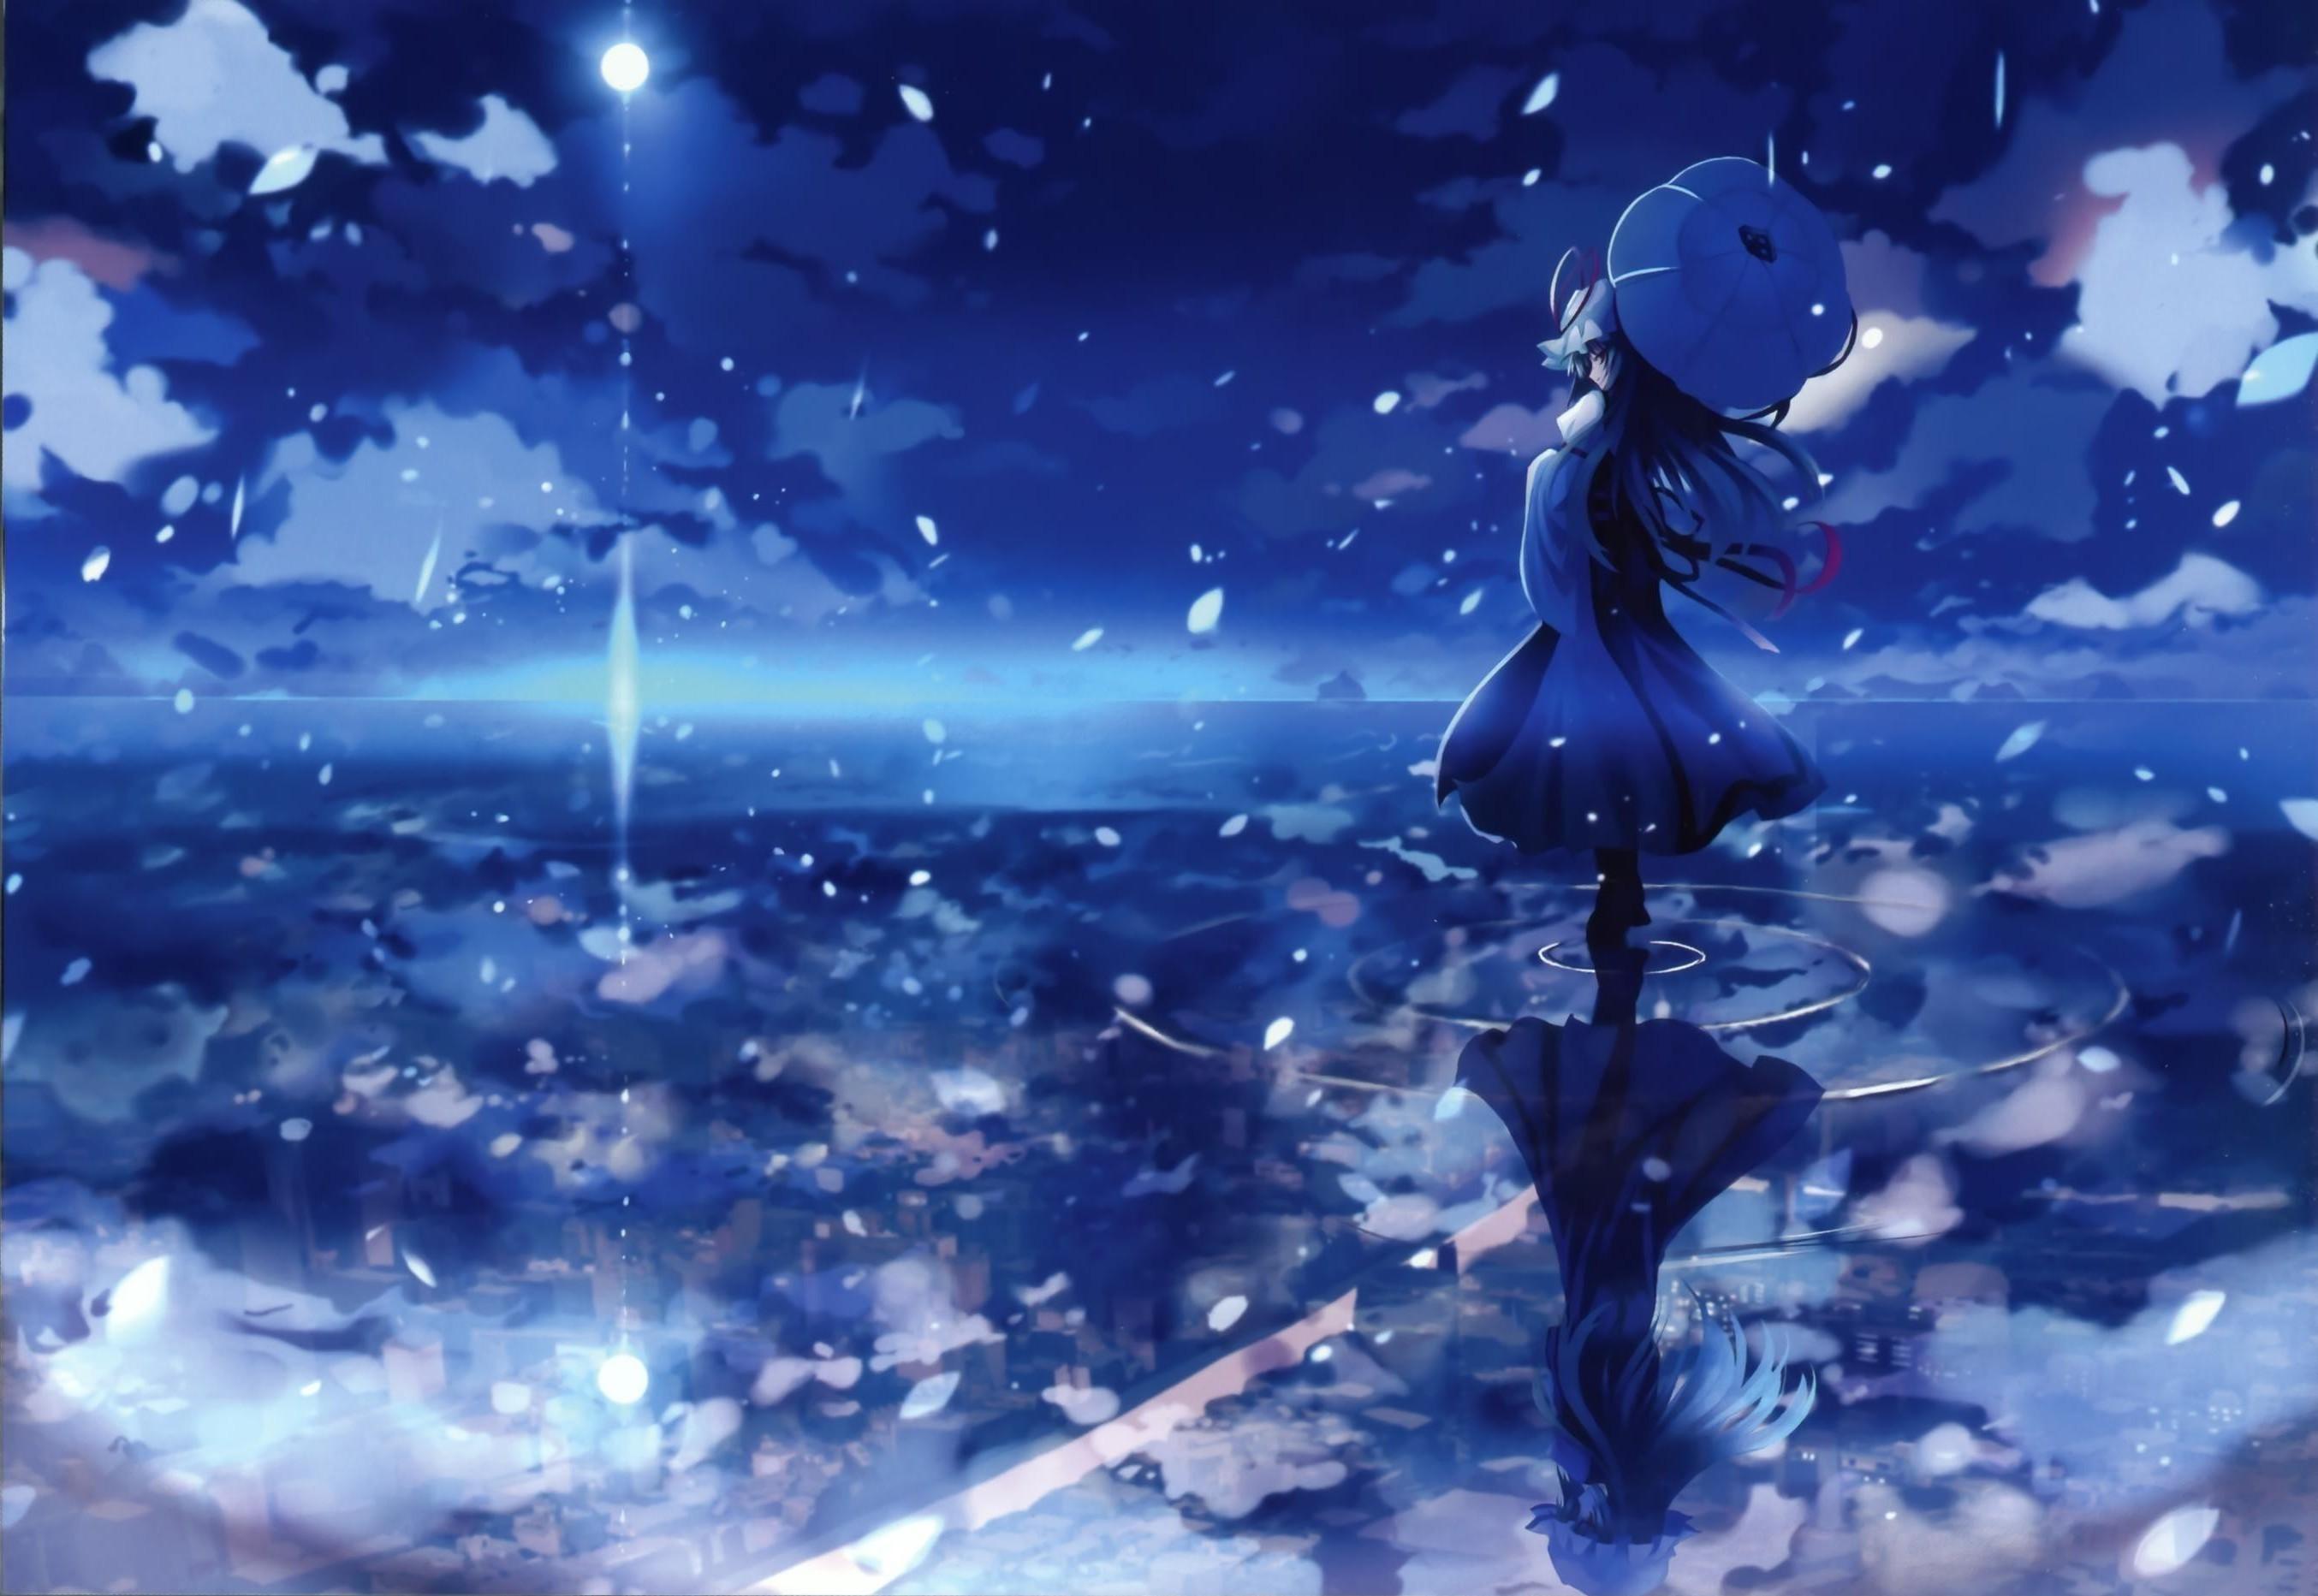 Anime Blue Aesthetic Wallpapers  Wallpaper Cave  Aesthetic anime Blue  anime Anime wallpaper